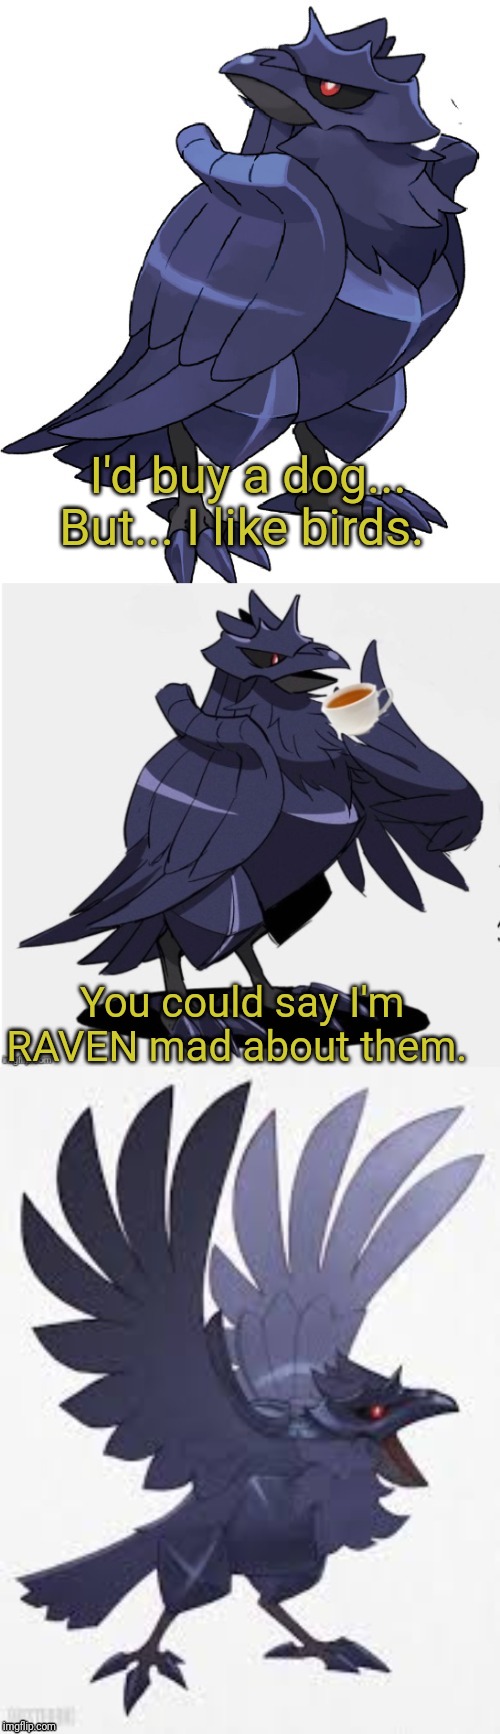 Bad Pun TTDC | I'd buy a dog... But... I like birds. You could say I'm RAVEN mad about them. | image tagged in bad pun ttdc | made w/ Imgflip meme maker